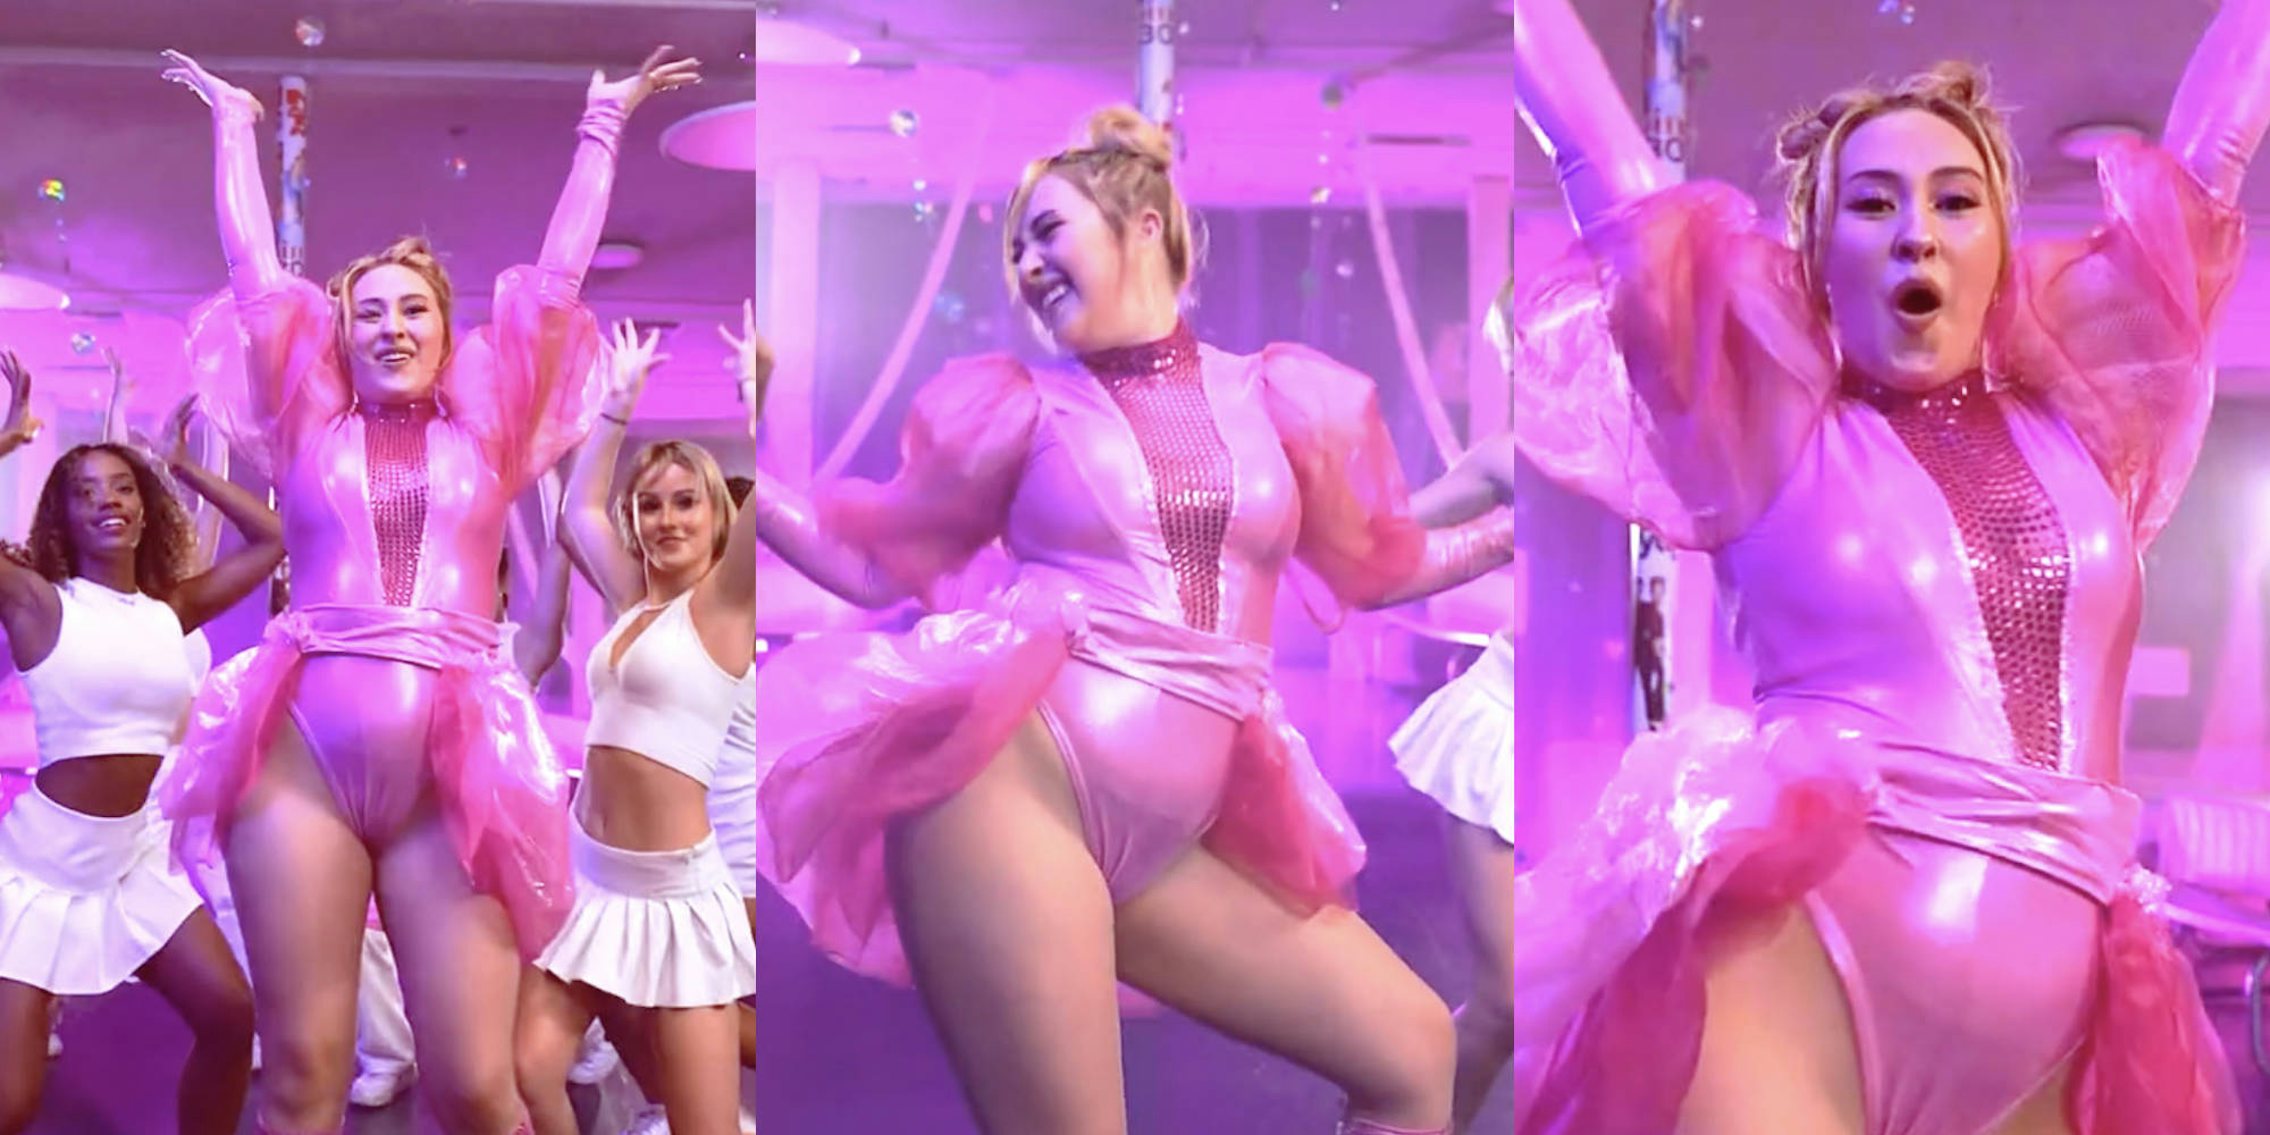 three photos of singer, XOBrooklynne, wearing a pink outfit and dancing to choreography